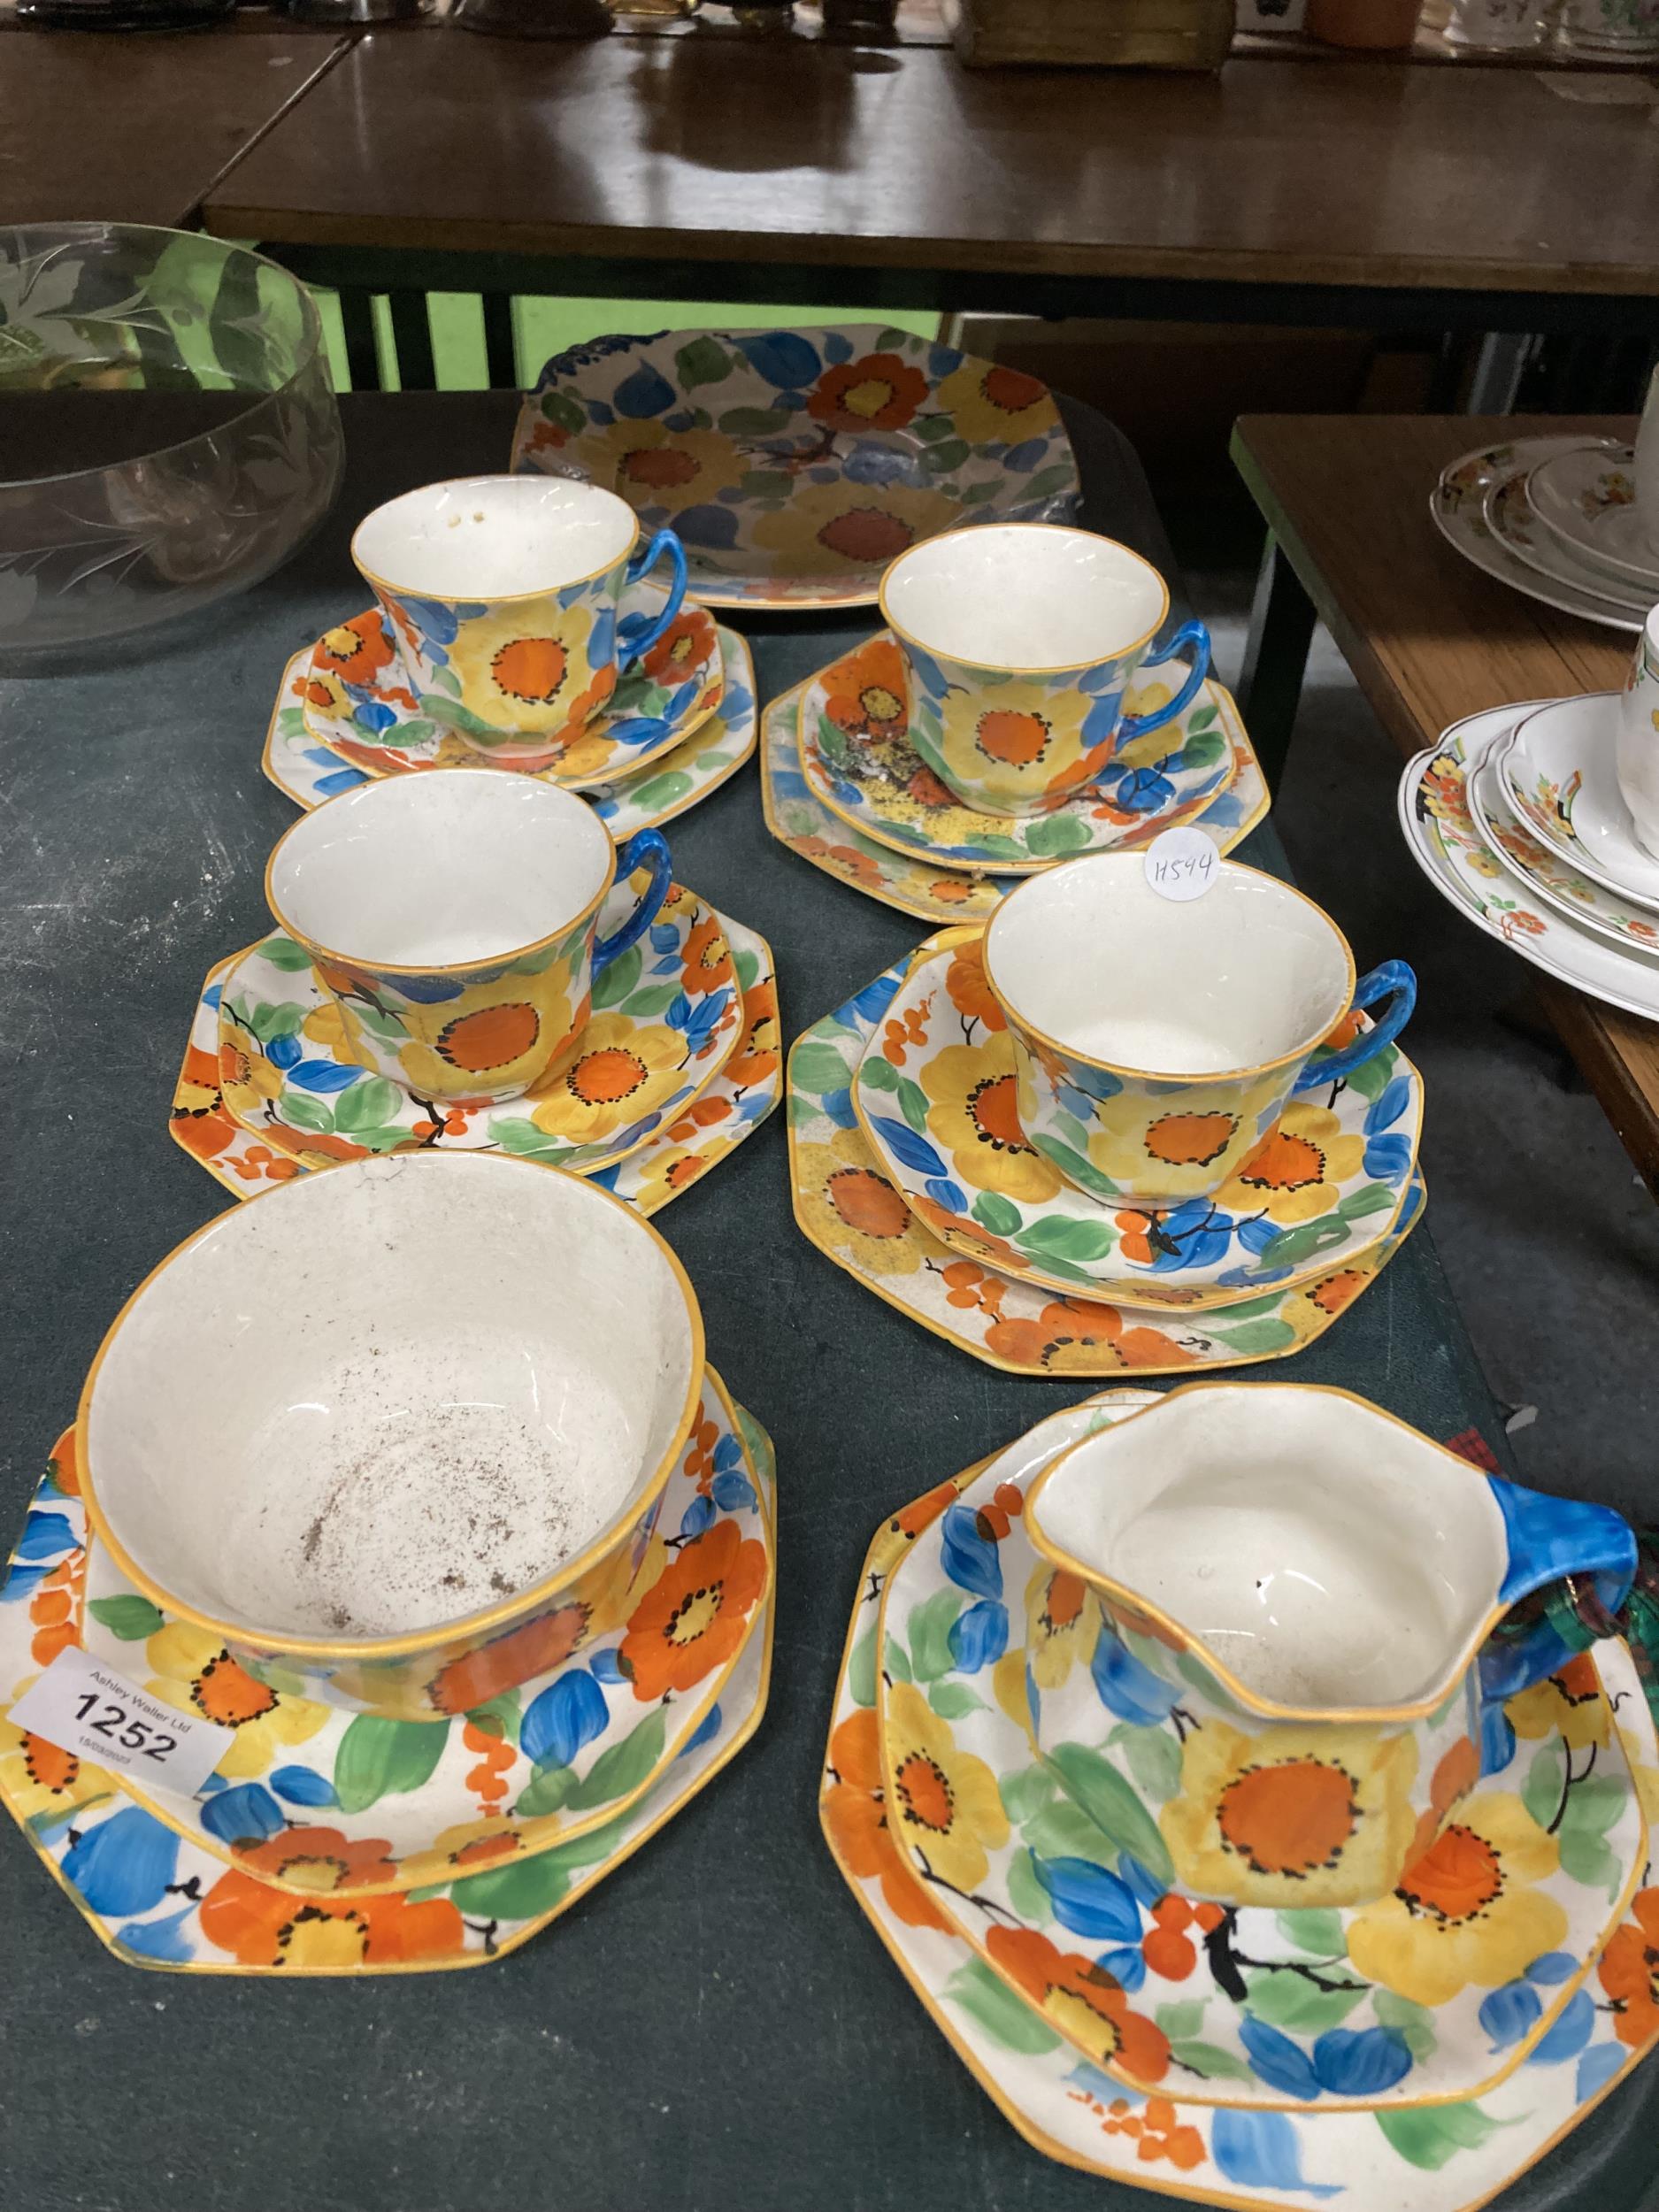 A VINTAGE TEASET IN A FLORAL DESIGN TO INCLUDE A CAKE PLATE, CUPS, SAUCERS, SIDE PLATES, A CREAM JUG